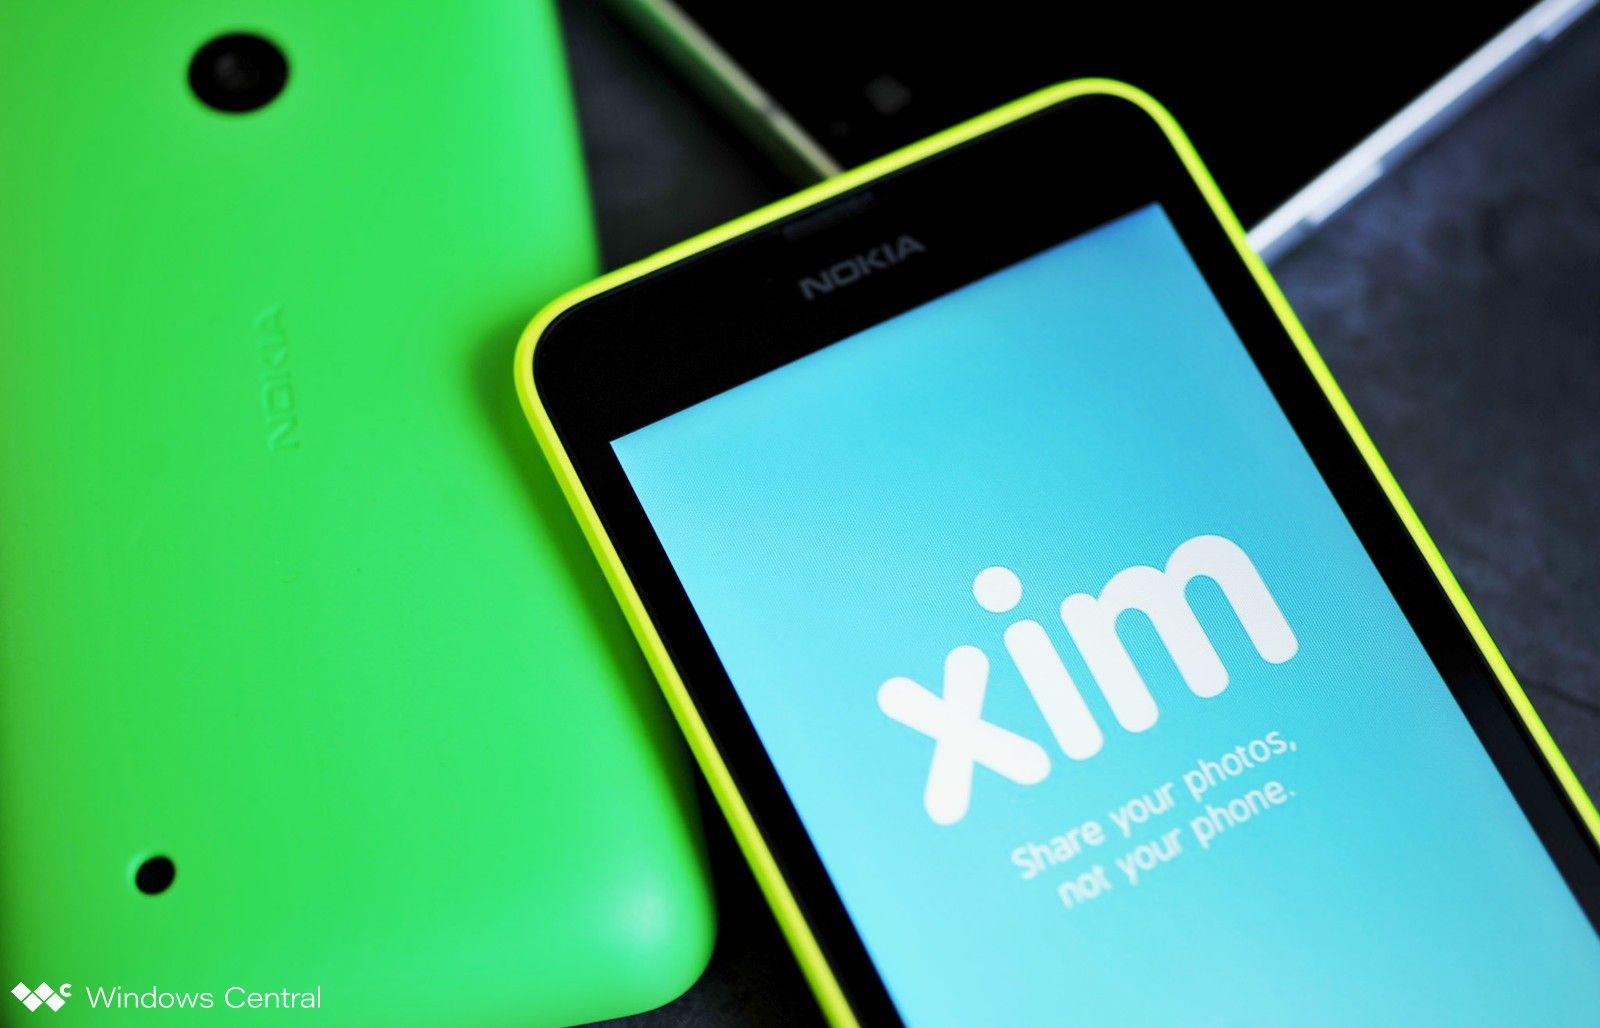 Xim Logo - Xim from Microsoft Research now shares photos with Xbox One ...